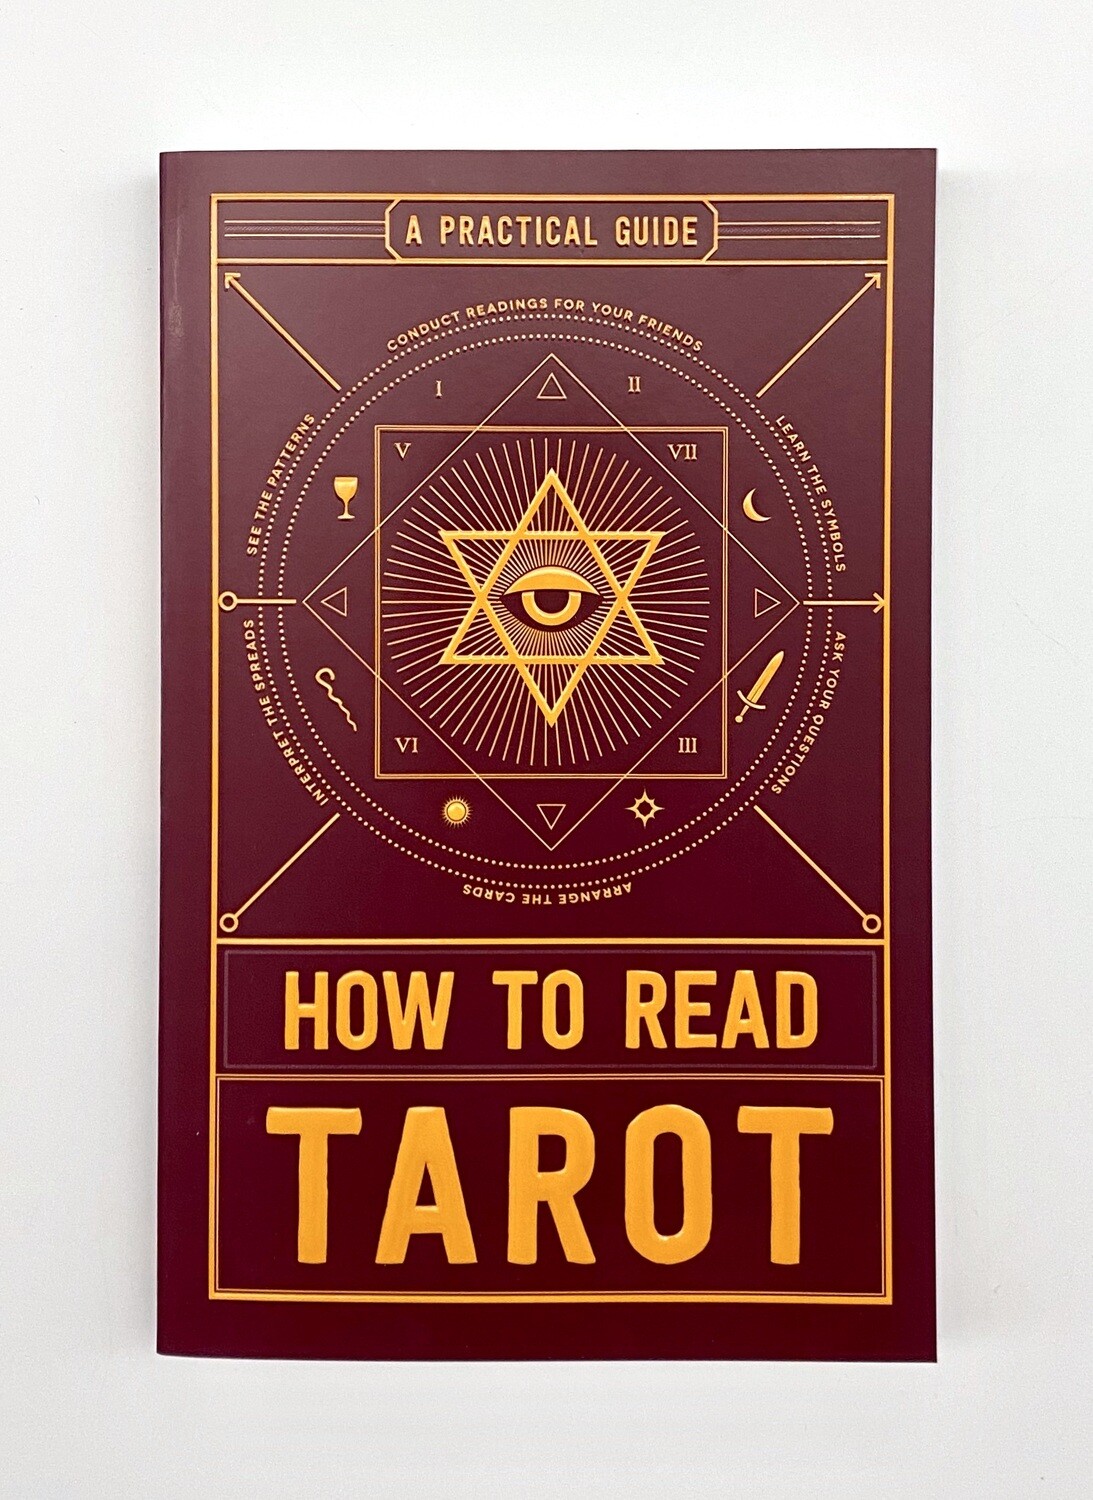 NEW - How to Read Tarot: A Practical Guide, Adams Media